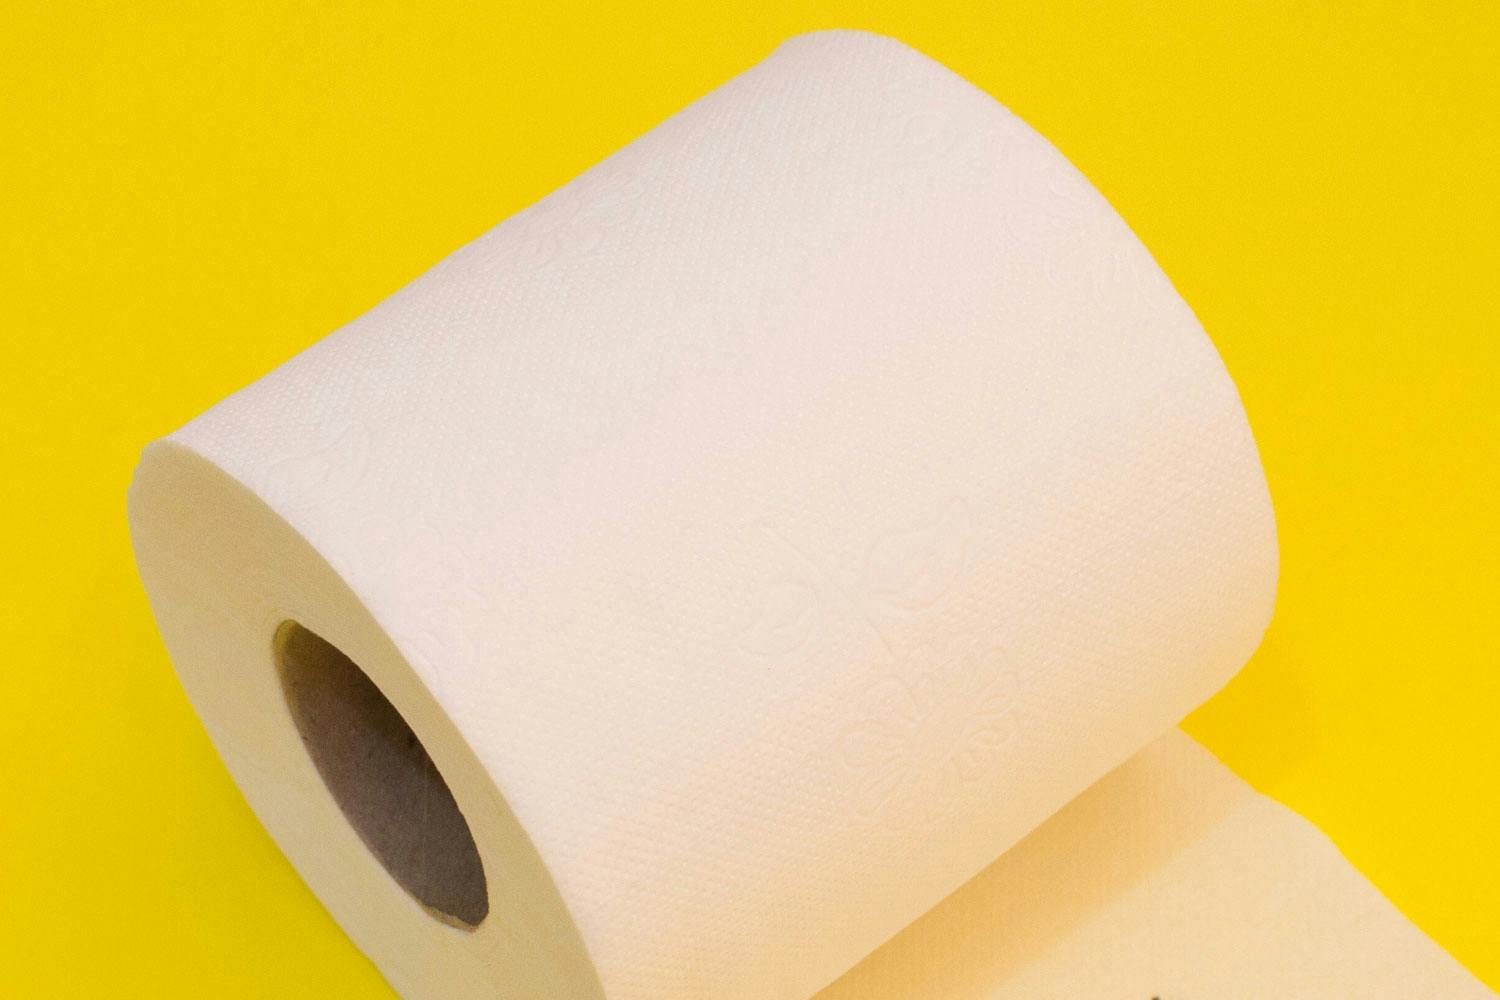 A roll of toilet paper on a yellow background.